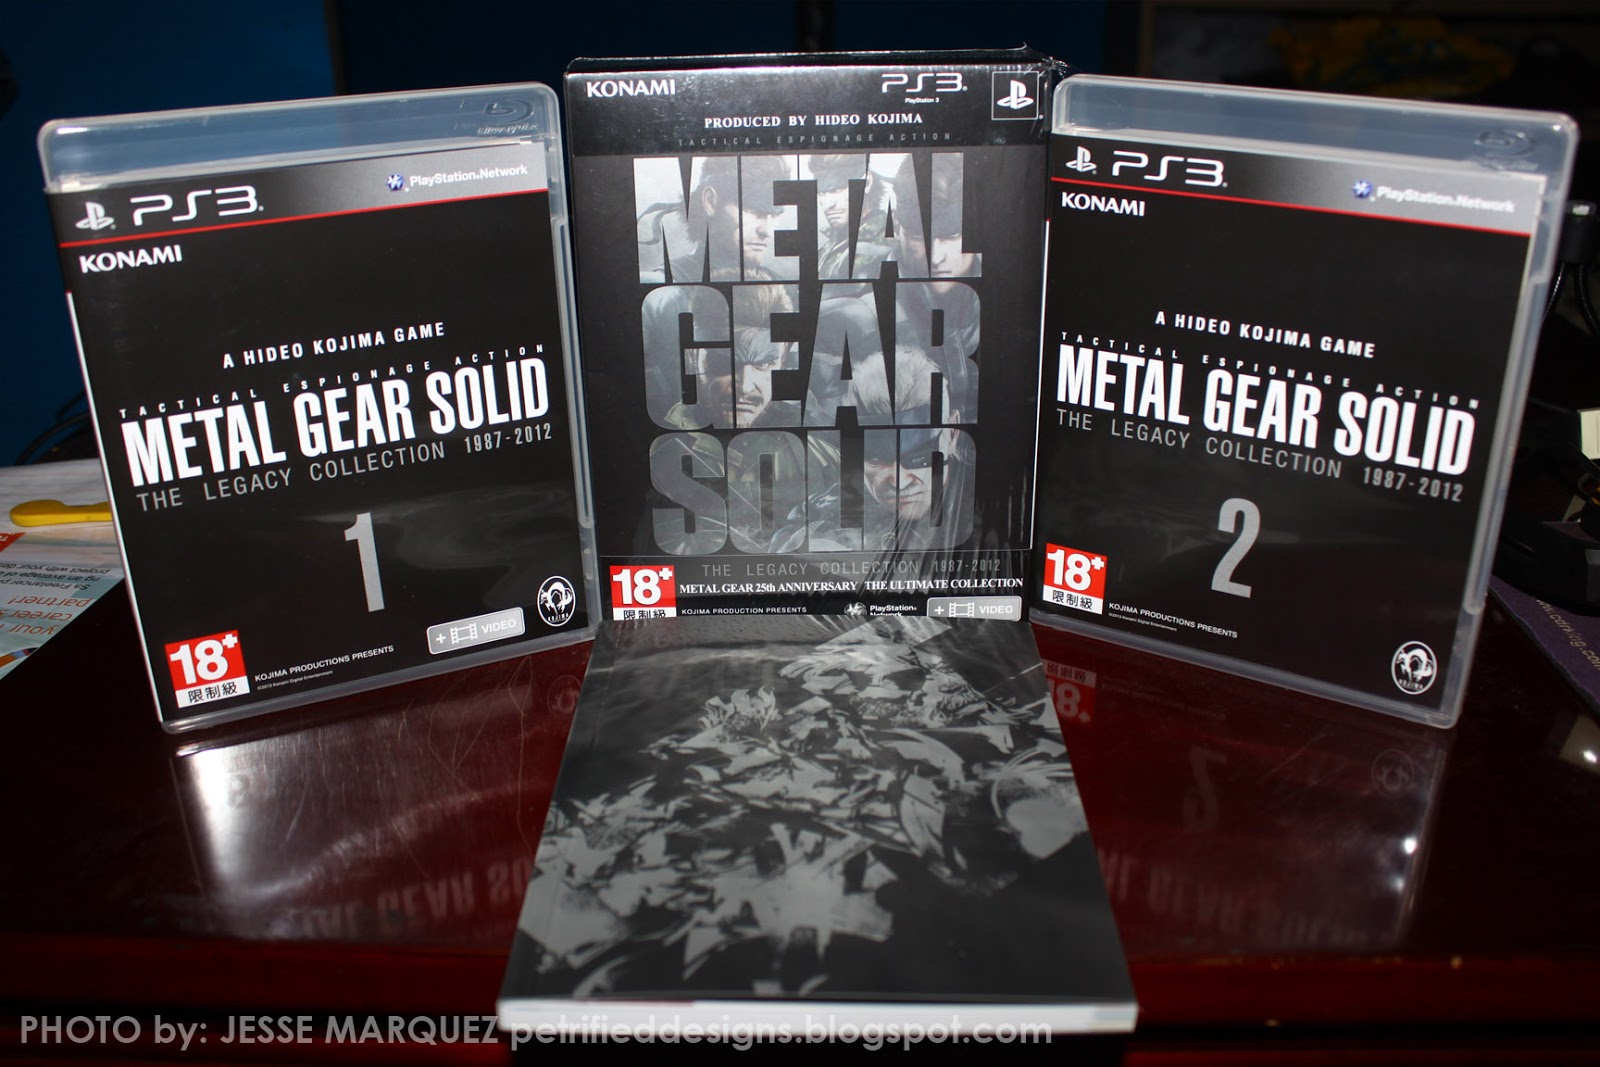 Mgs 3 master collection. Metal Gear Solid: the Legacy collection. Метал Гир Солид Legacy collection. Metal Gear Solid 1 ps3. Метал Гир Солид 3 диск.